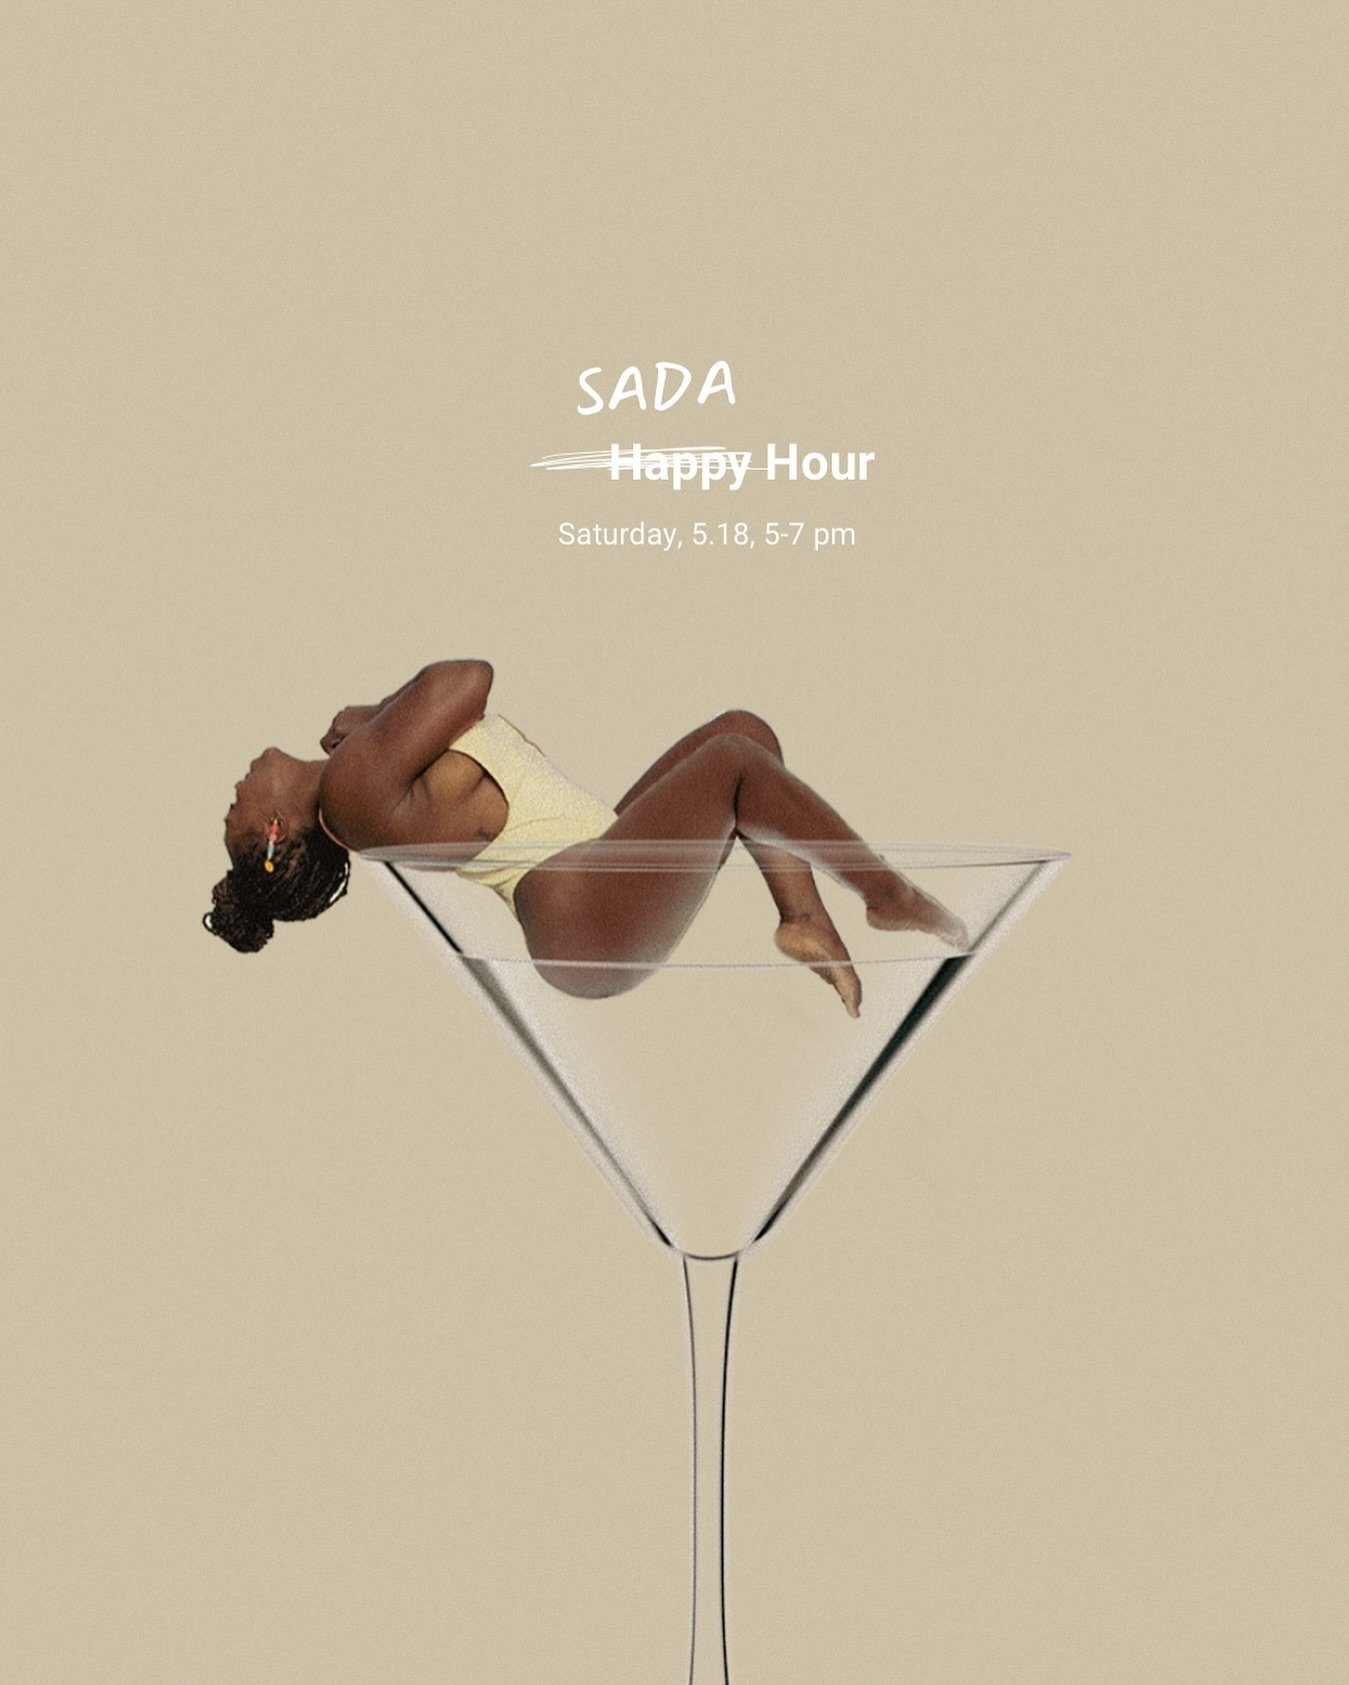 Come through and chill with SADA for a social hour this Saturday at 5-7 pm between Industry City buildings 1 &amp; 2. Only 25 spots available so comment &lsquo;SOCIAL&rsquo; to secure your spot. 

We can&rsquo;t wait to meet y&rsquo;all💚